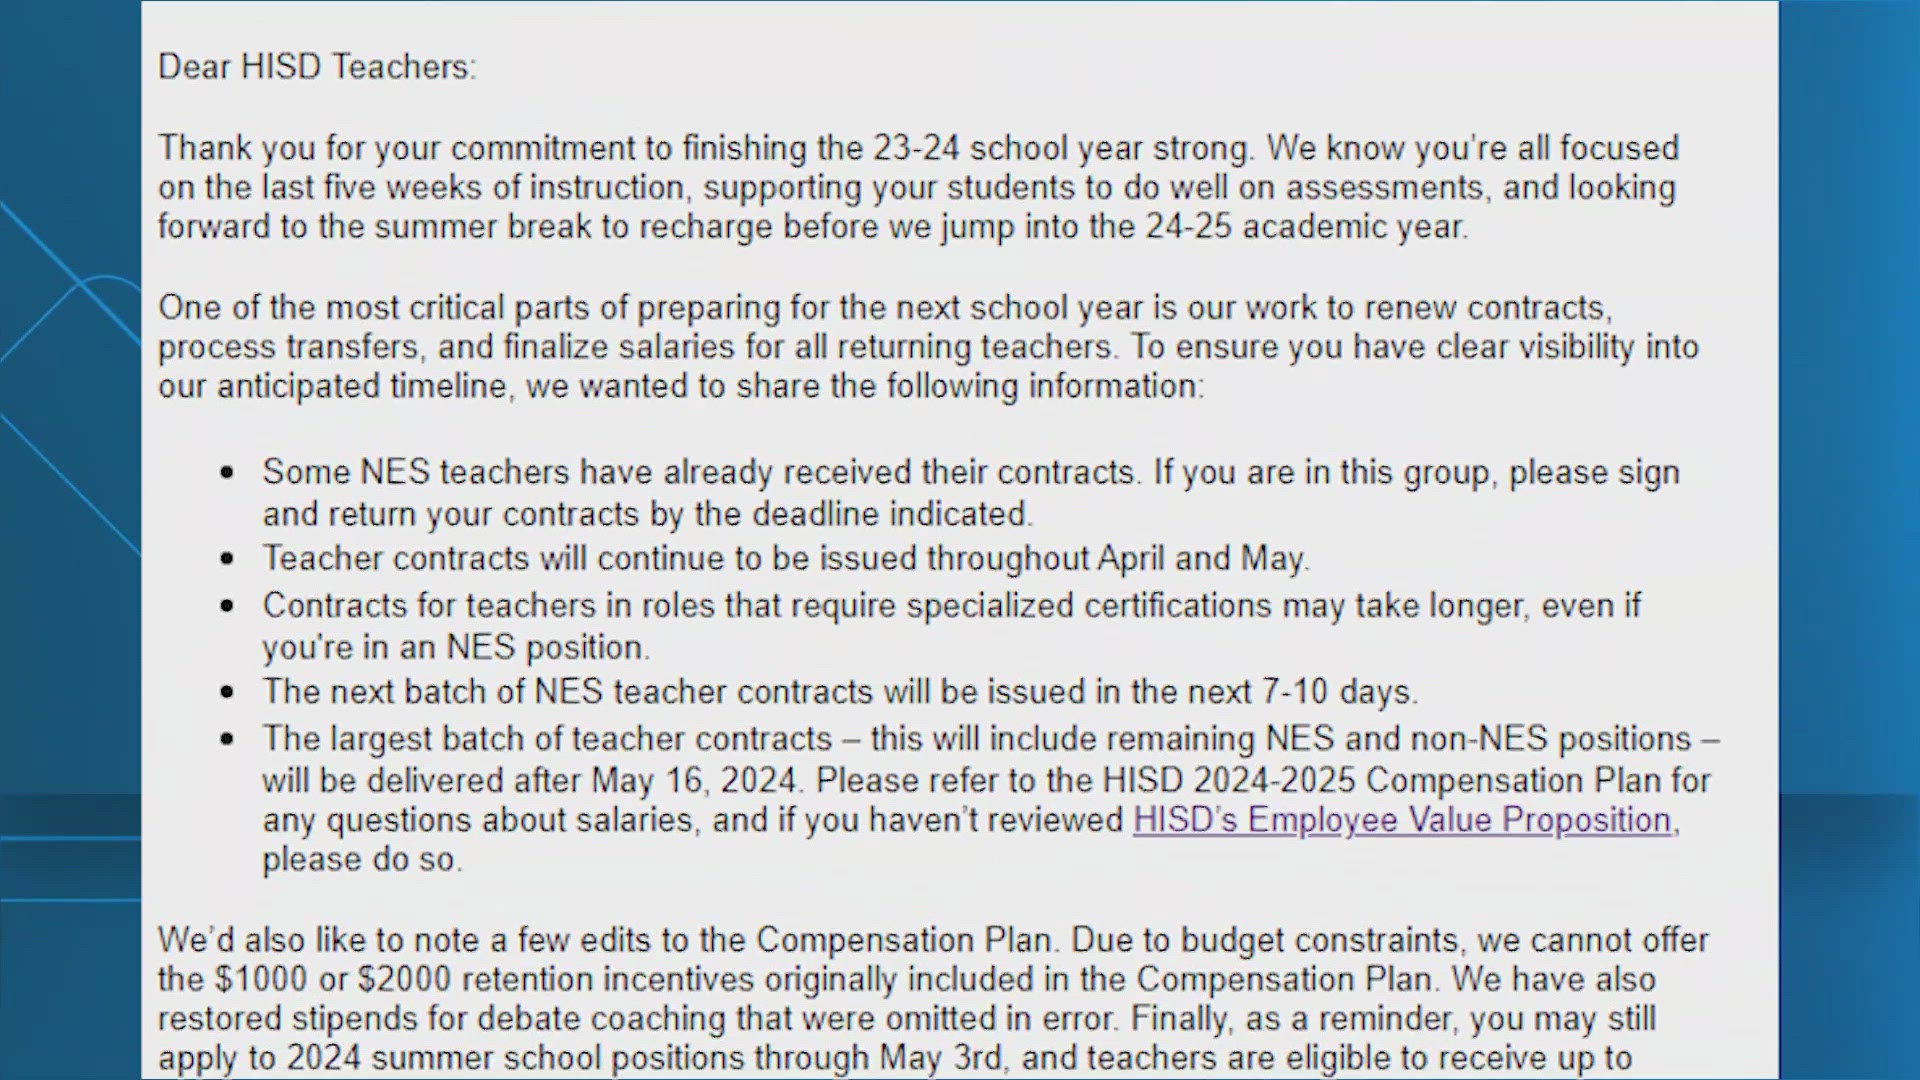 In a letter to teachers, the district said it can't afford the bonuses that were promised.